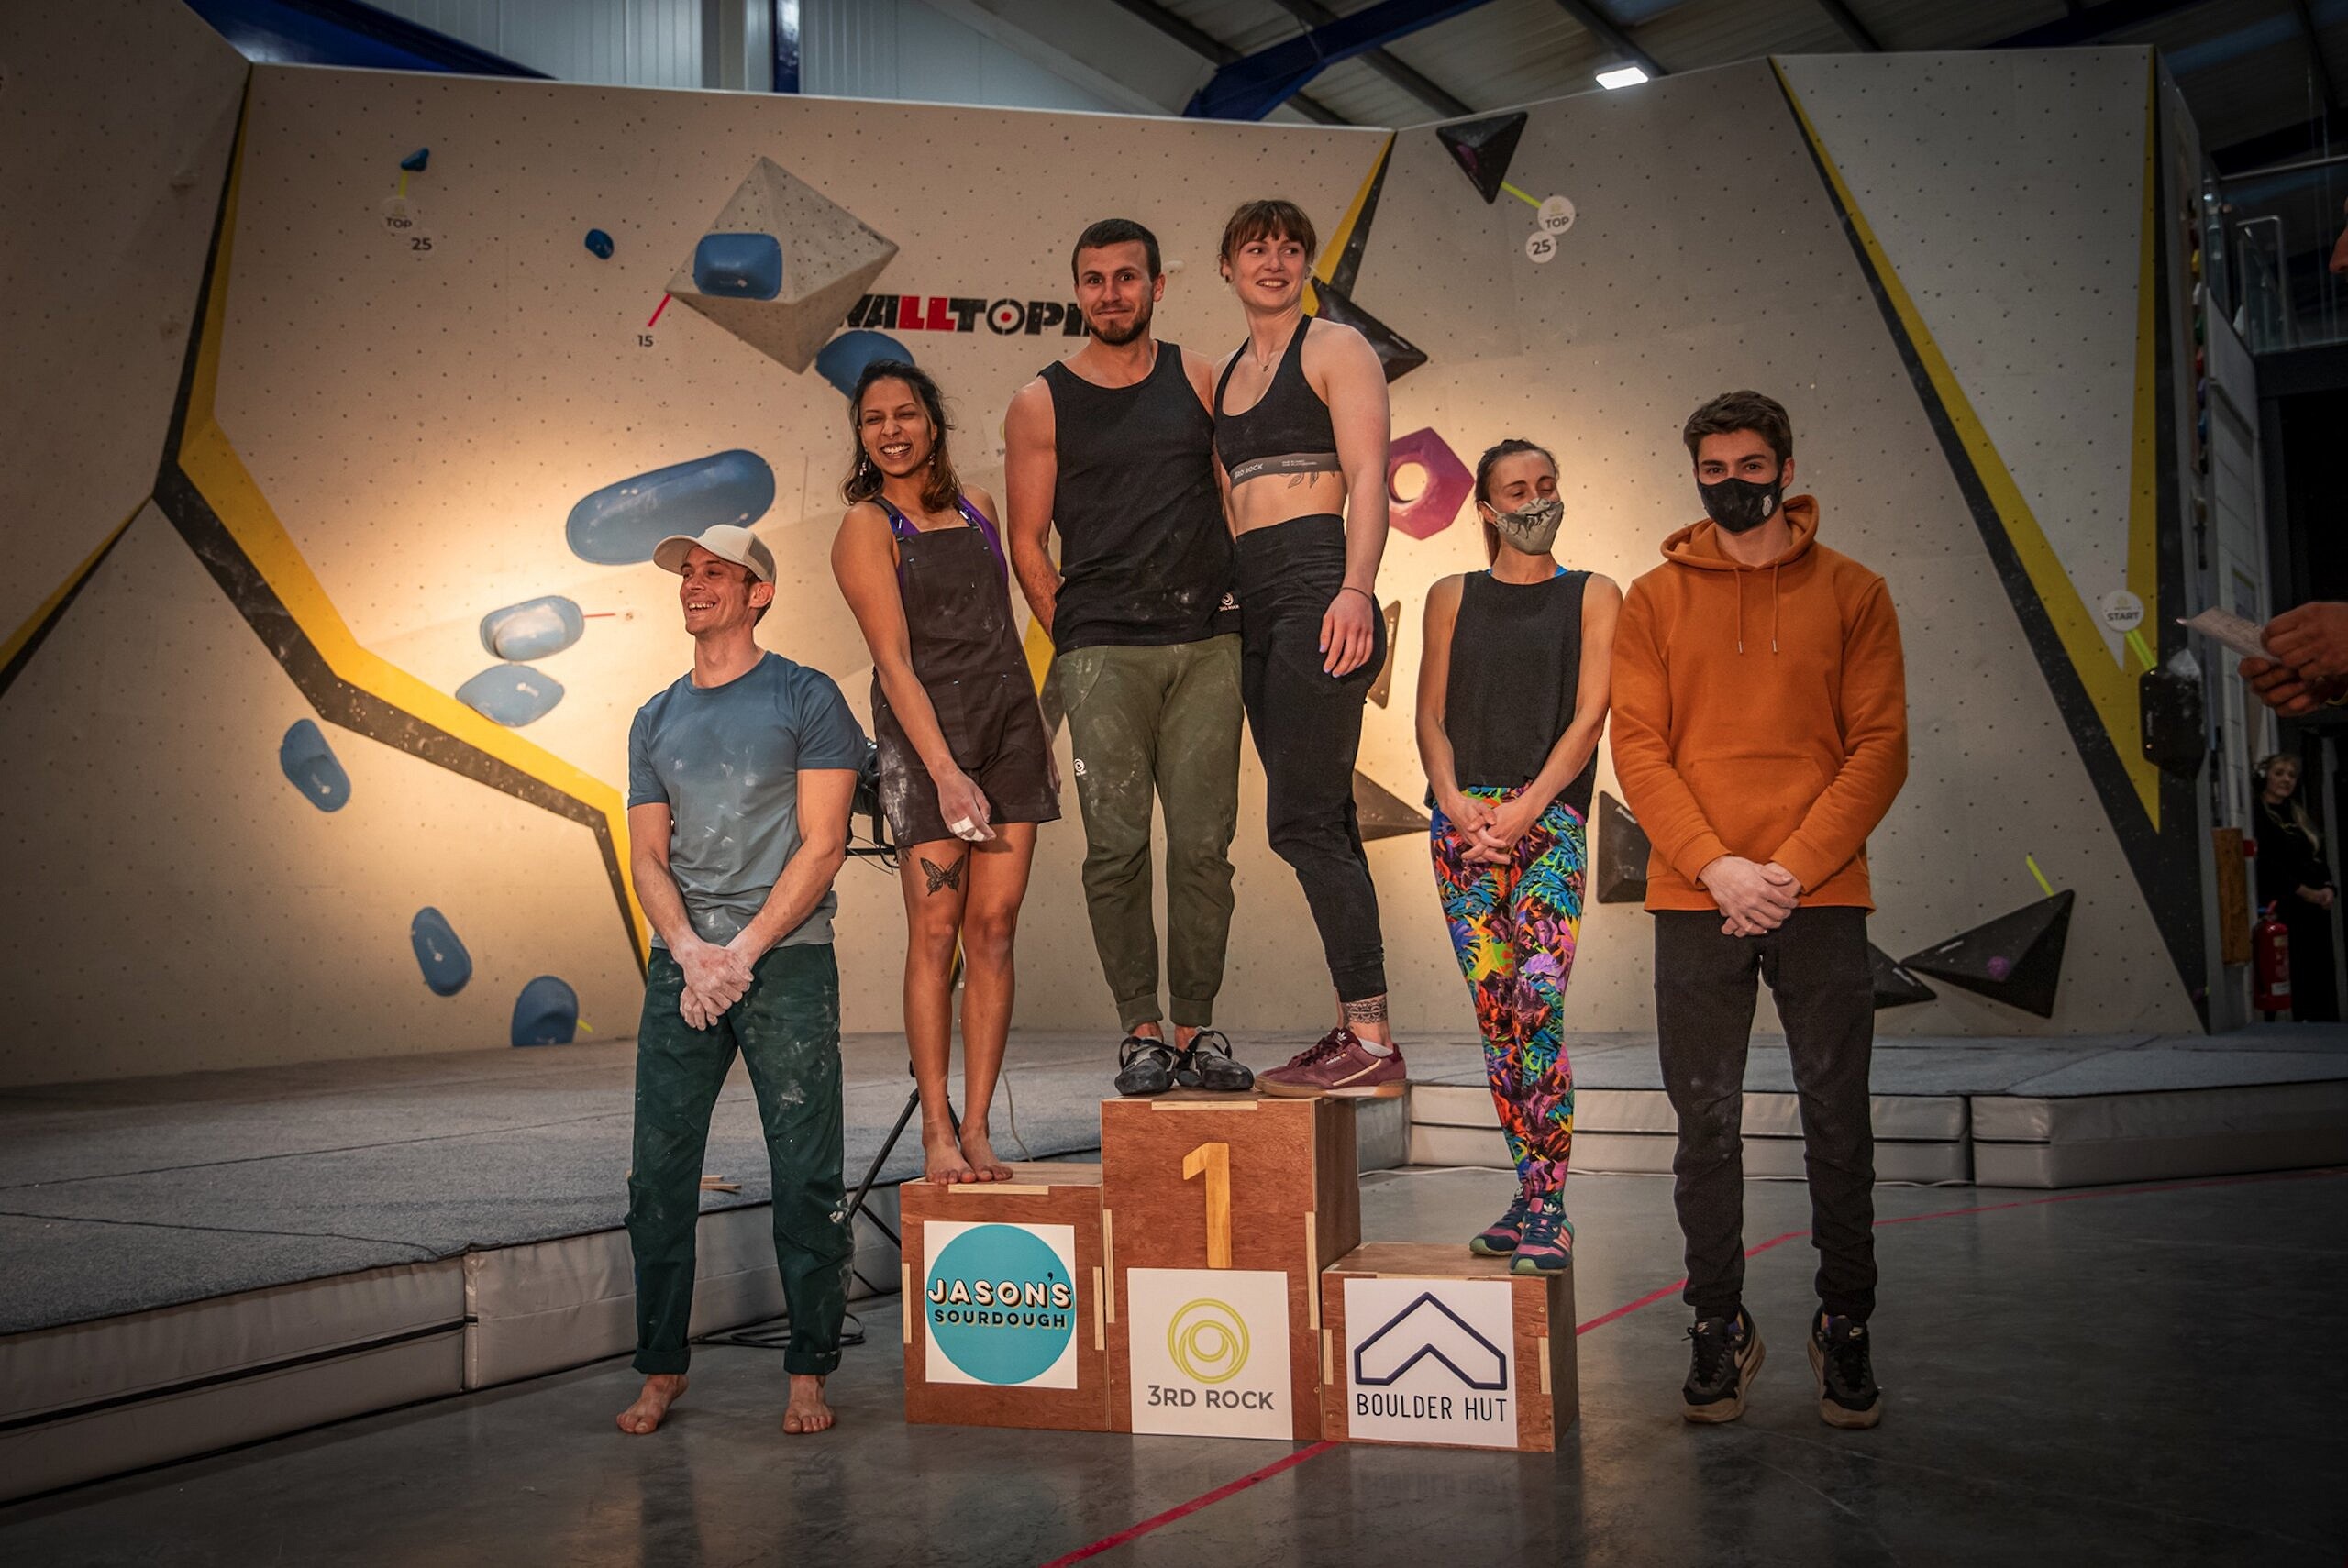 Left to right: Mikey Celeverdon, Ayeesha Khan, James Taylor, Rachel Carr, Holly Rees and Billy Ridal  © 3RD ROCK